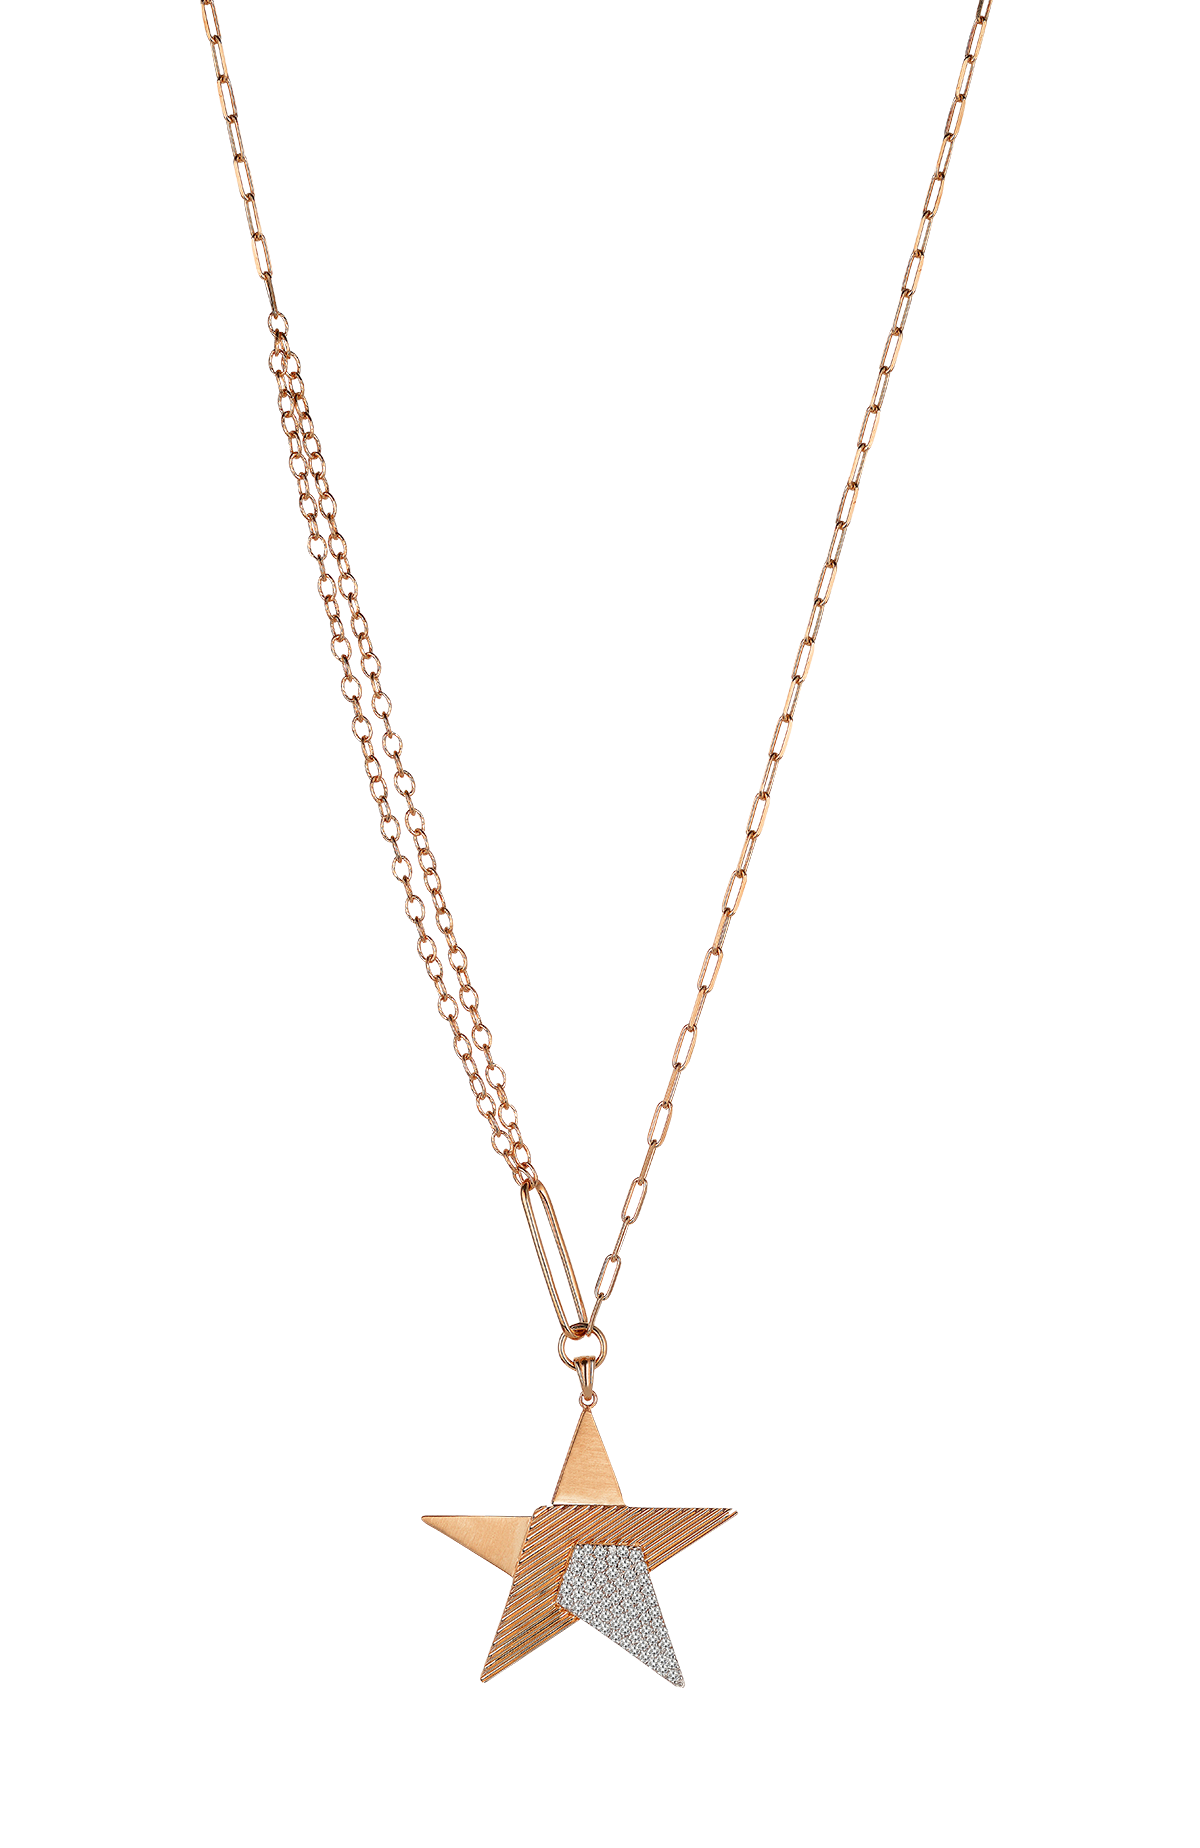 Galactic Necklace Star in Rose Gold - Her Story Shop